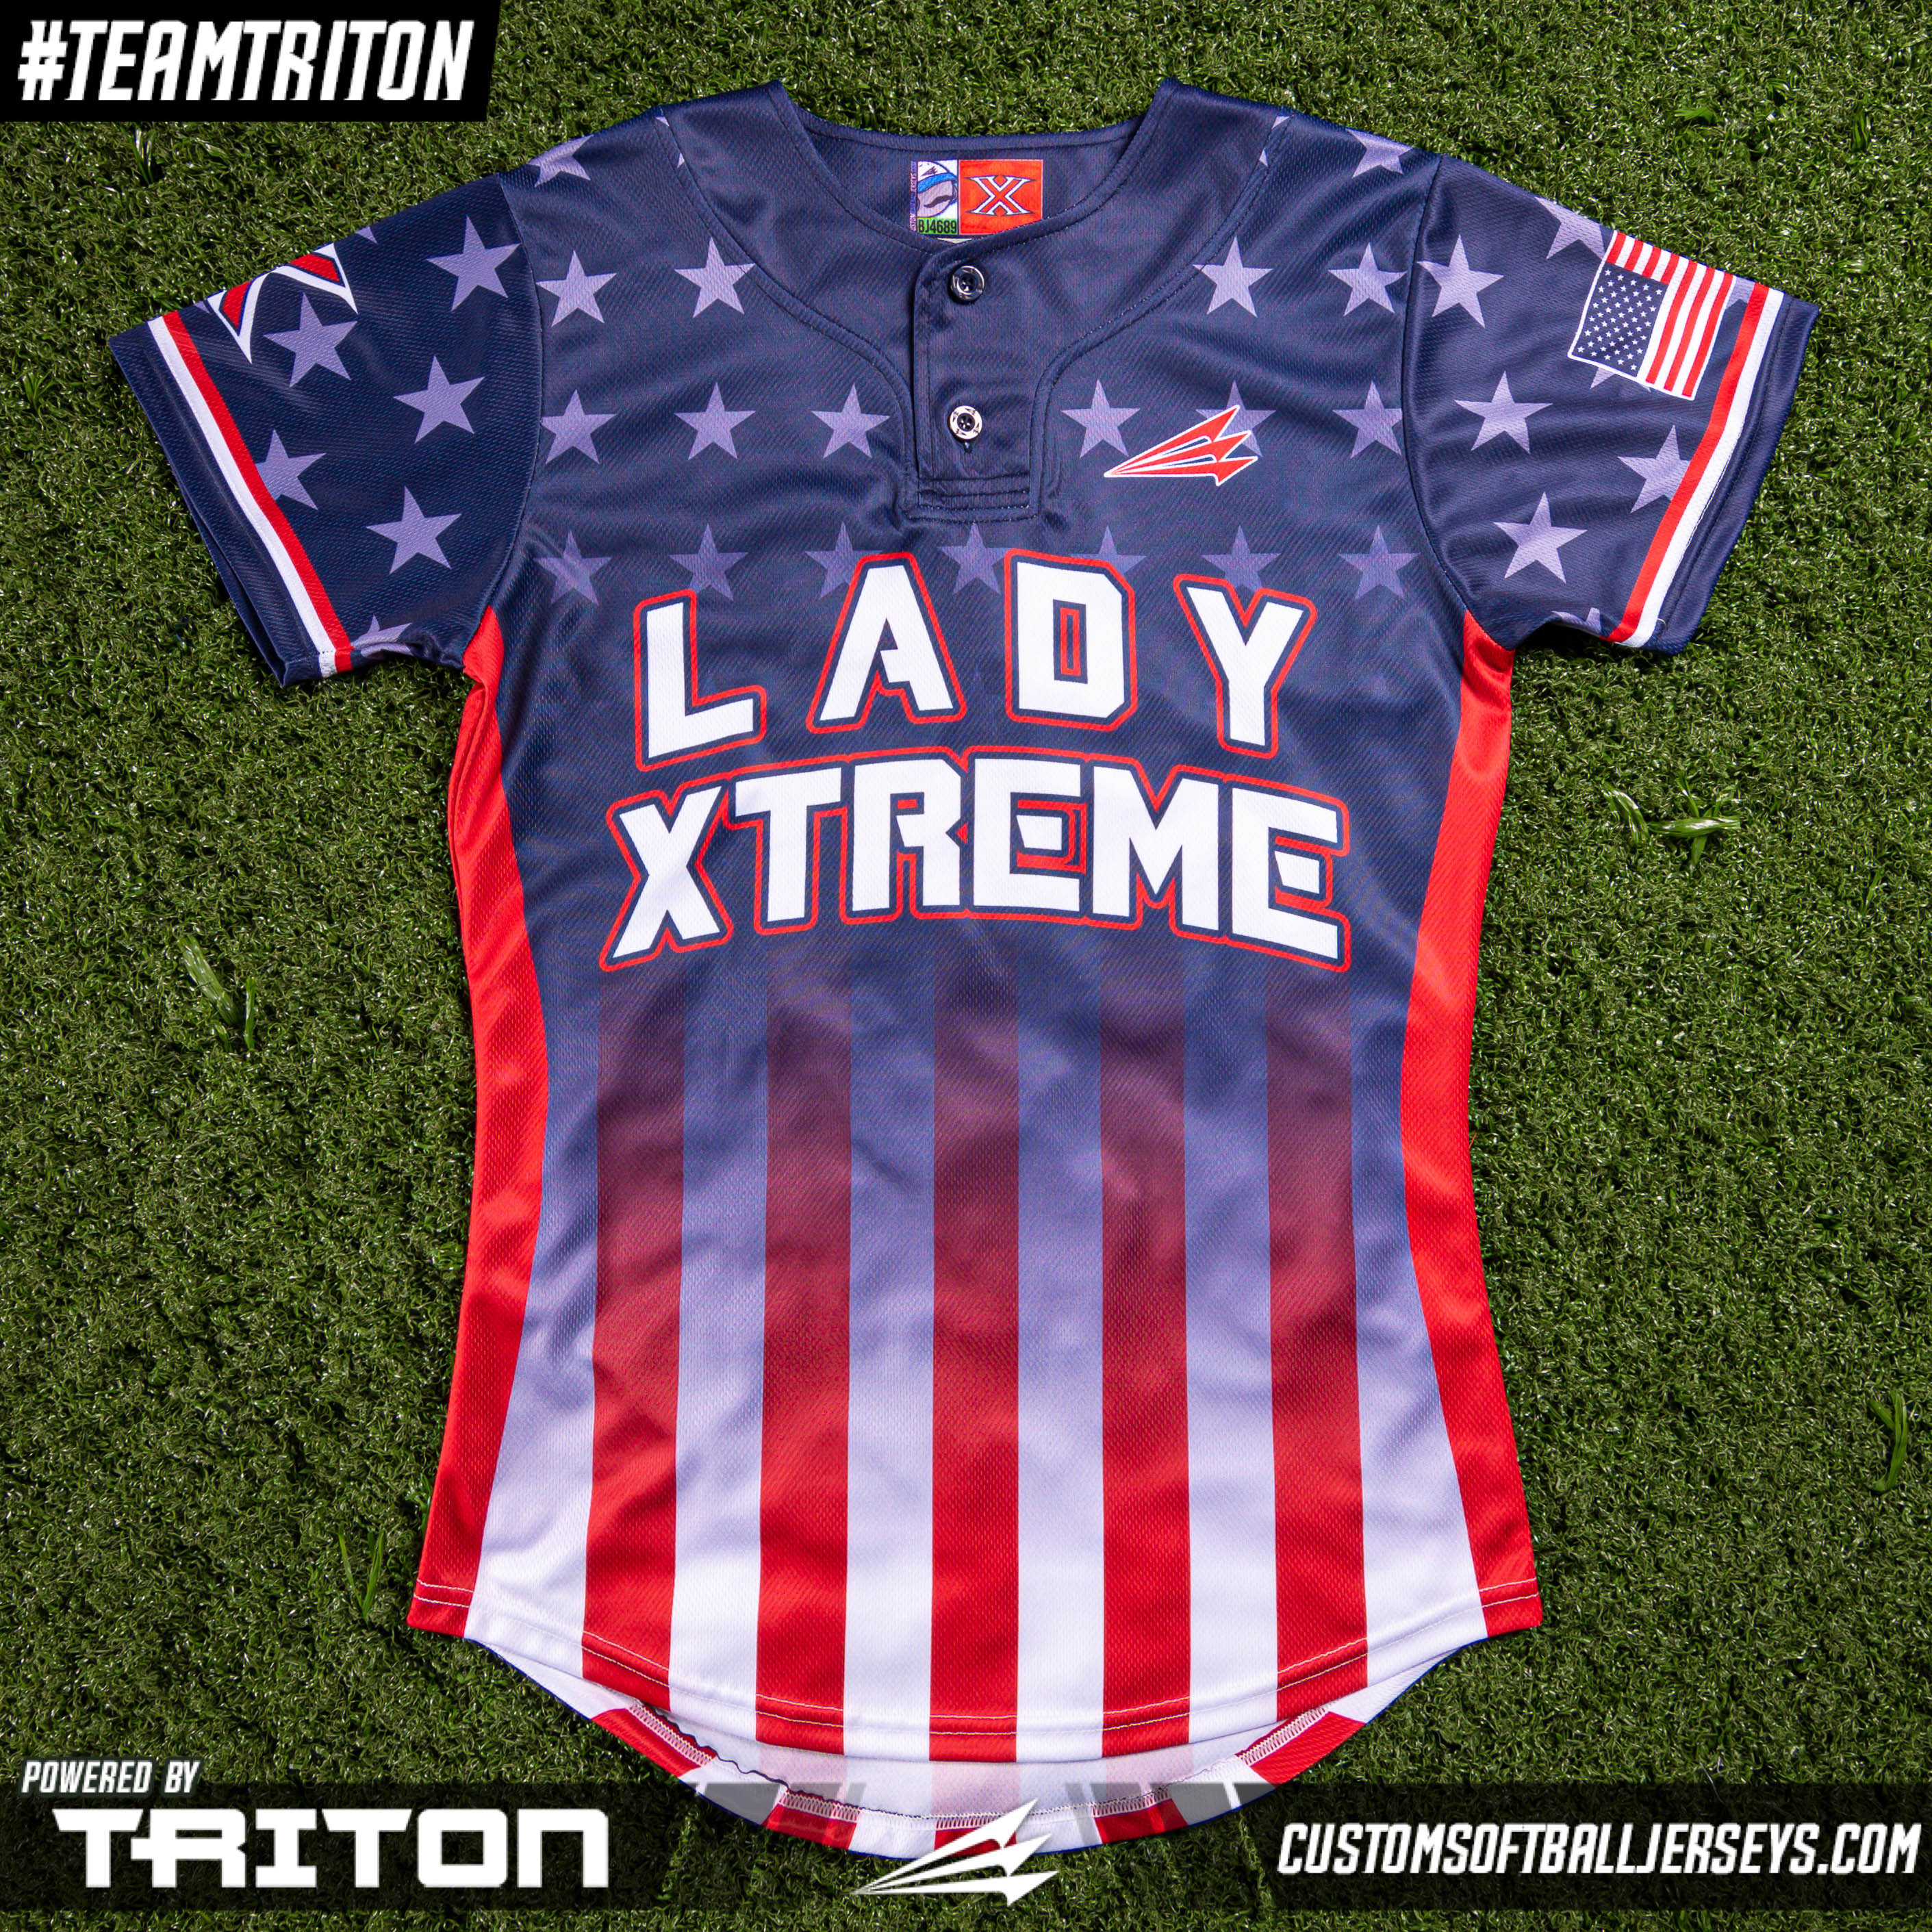 Custom Softball Jerseys on X: Xtreme Softball @lady_xtreme wears this  #Triton Patriotic design P127. Get ready for summer with custom jerseys,  including the best patriotic designs you'll find. Take a look here.